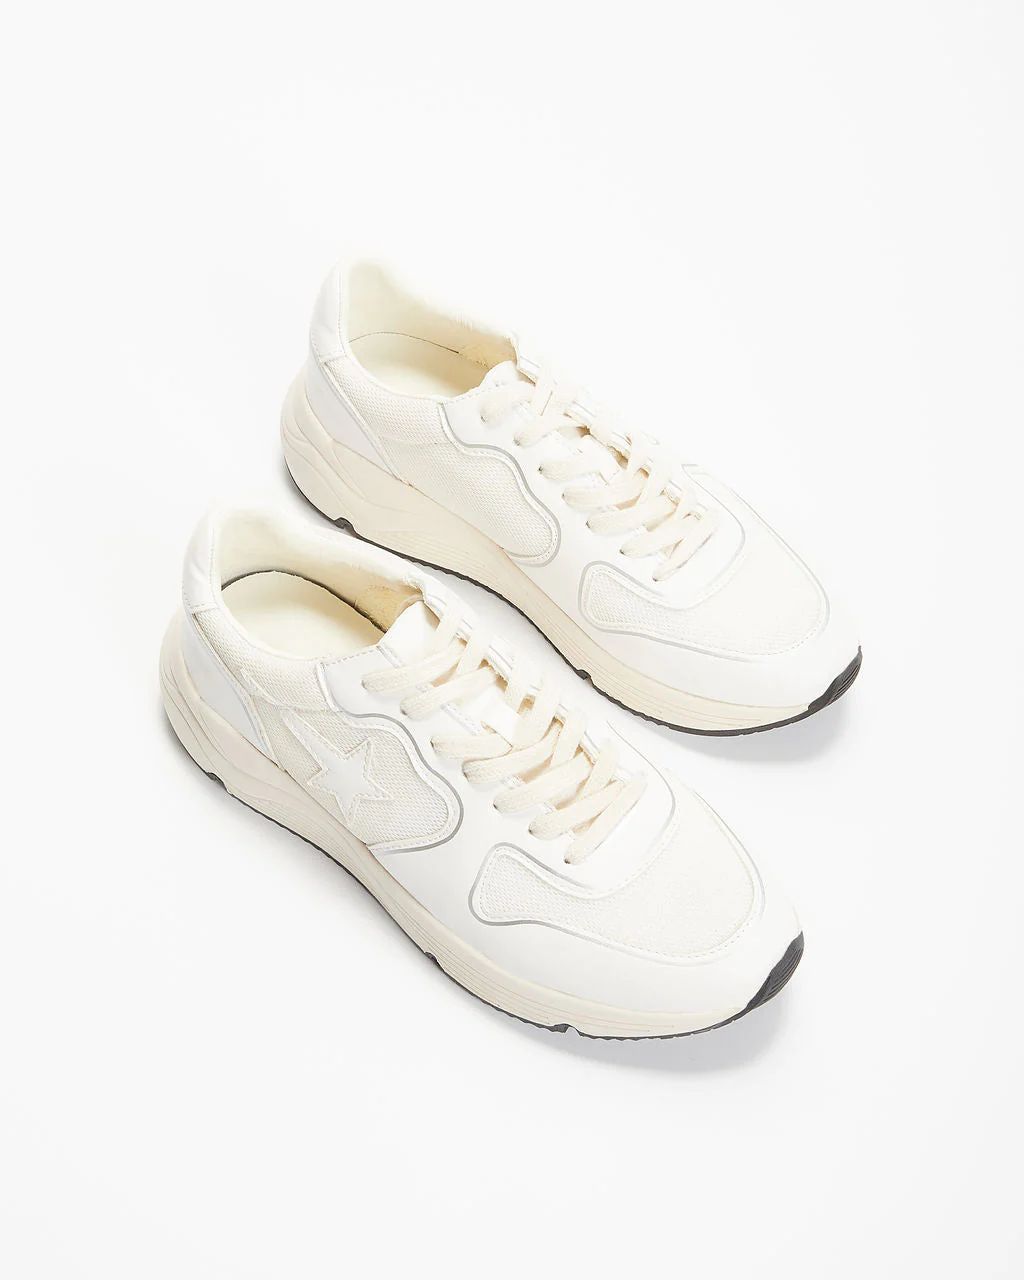 Vovo Lace Up Sneakers | VICI Collection